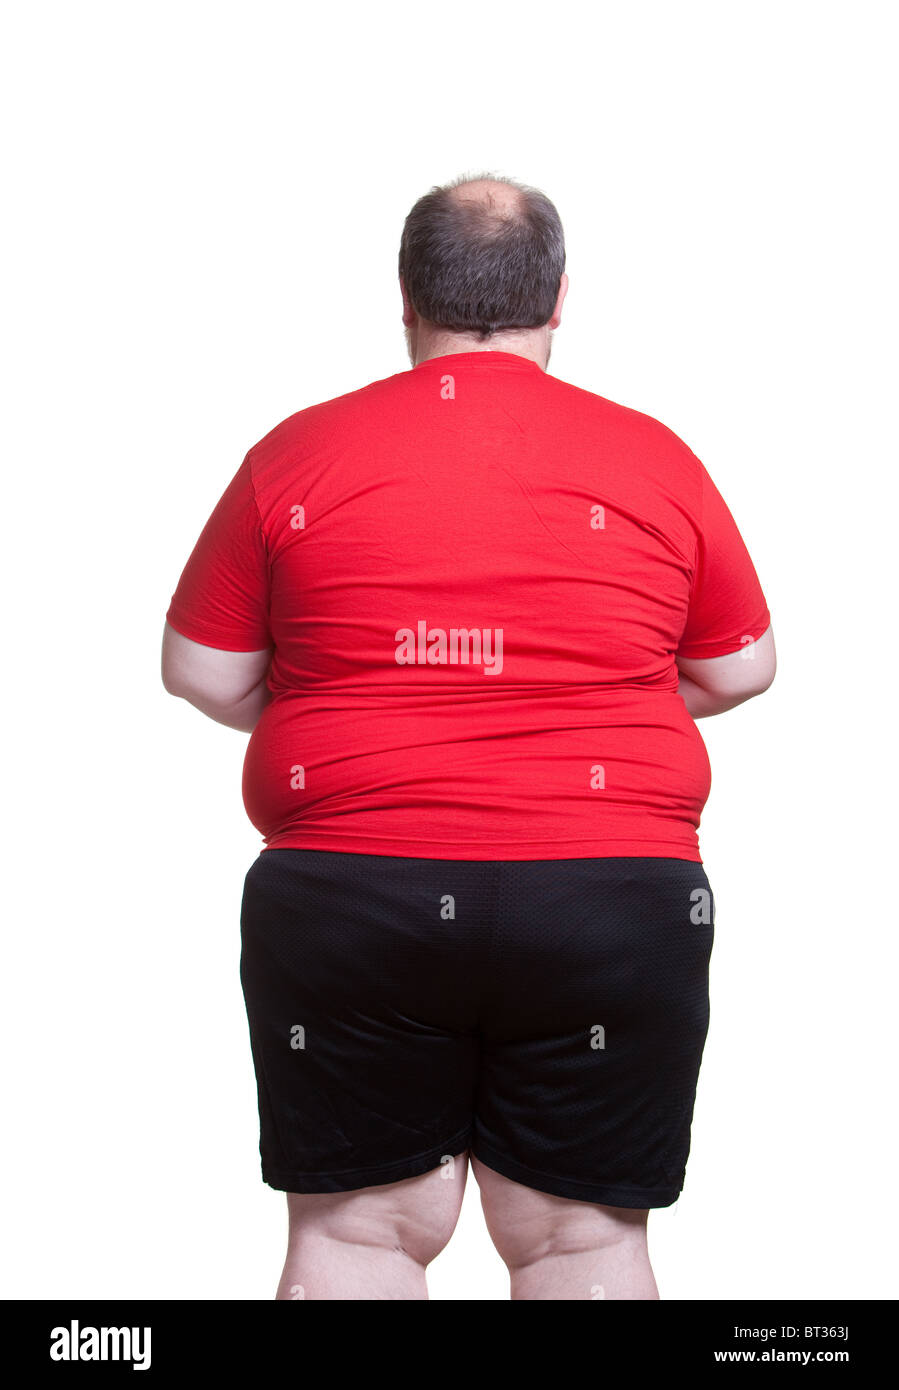 Obese man at 400lbs - back Stock Photo